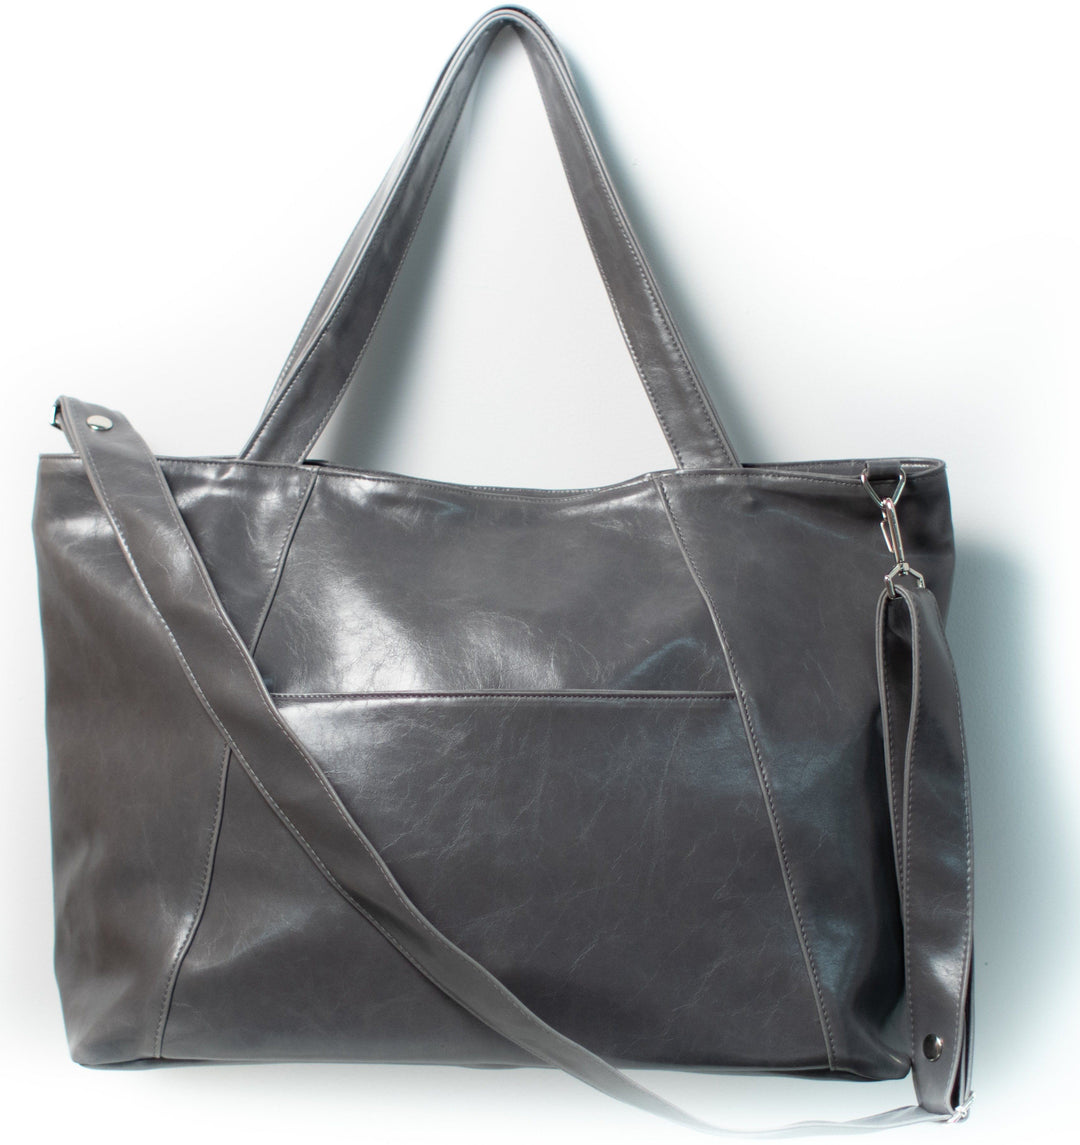 Womens  overnight Tote Bag - XL Troubadour Weekender Tote - Grey Vegan Leather made in usa